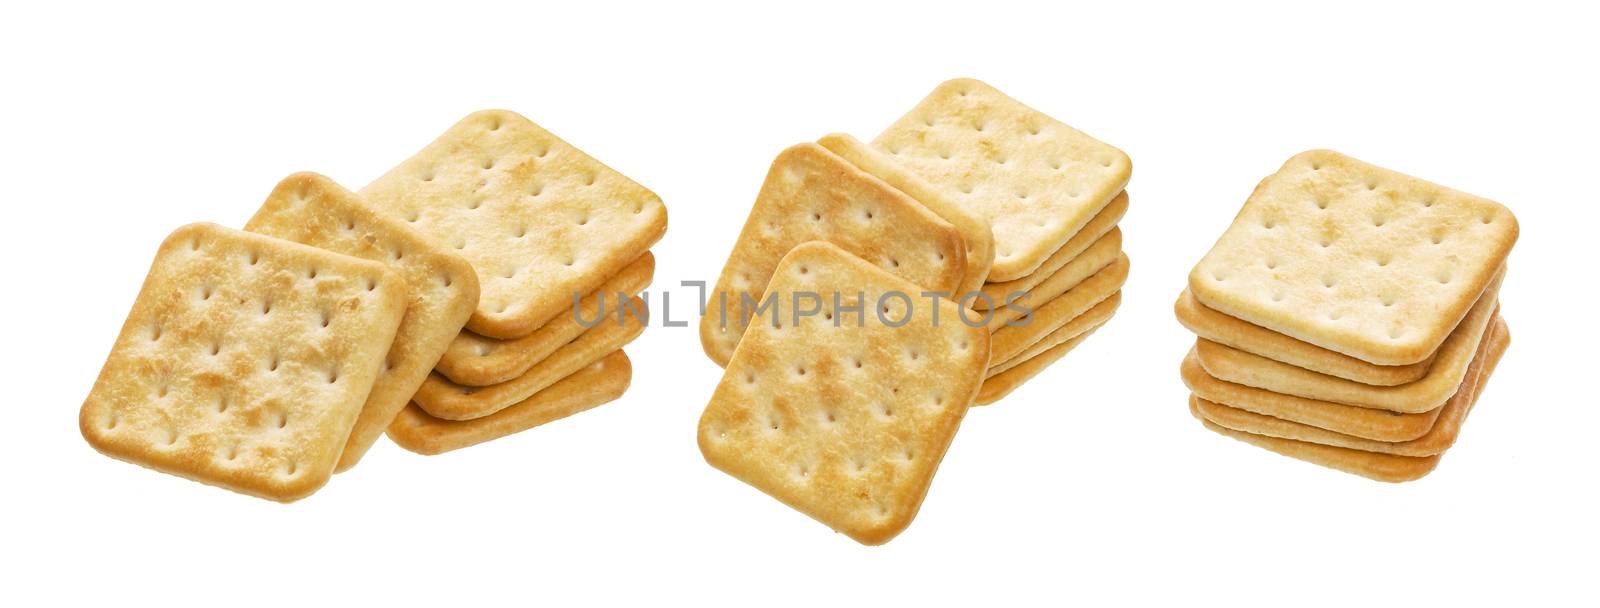 Stack of square crackers isolated on white background. Dry cracker cookies isolated with clipping path